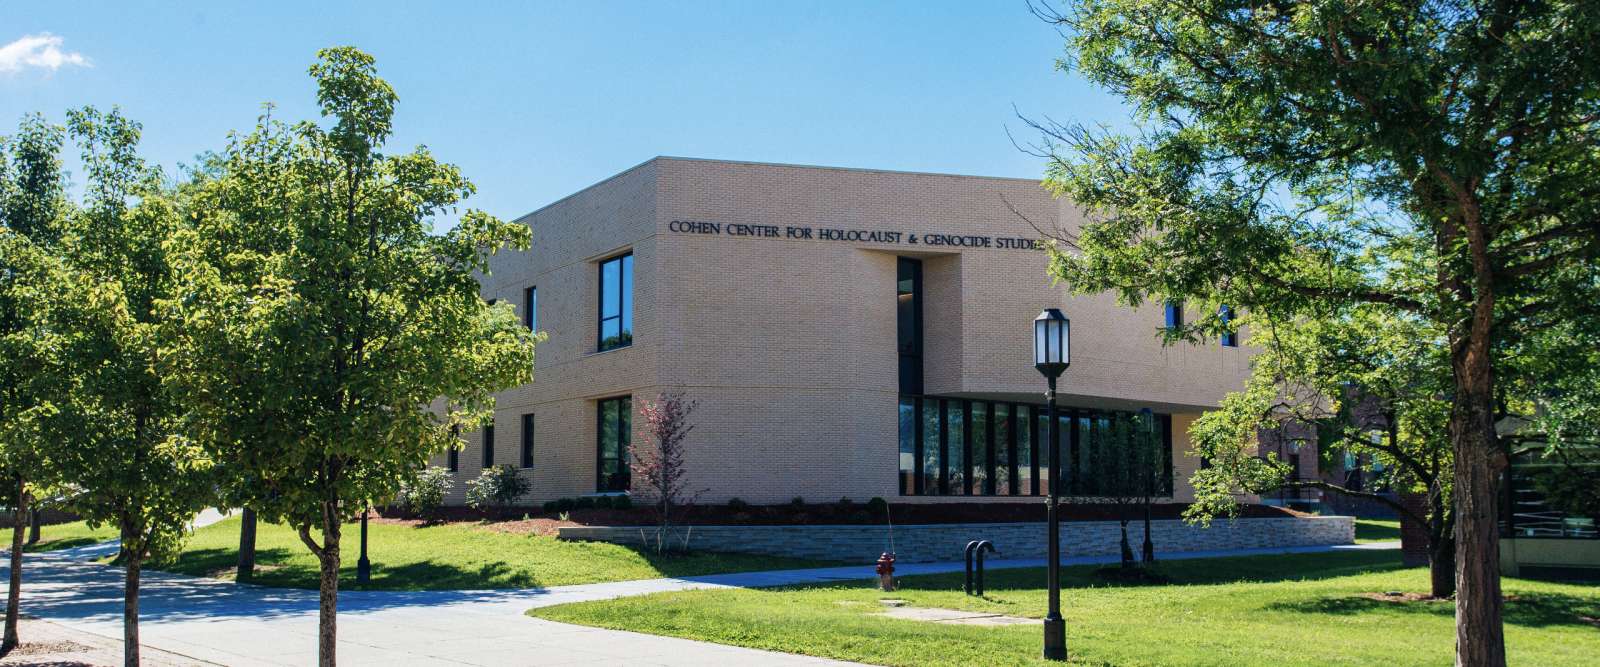 Cohen Center for Holocaust and Genocide Studies, exterior